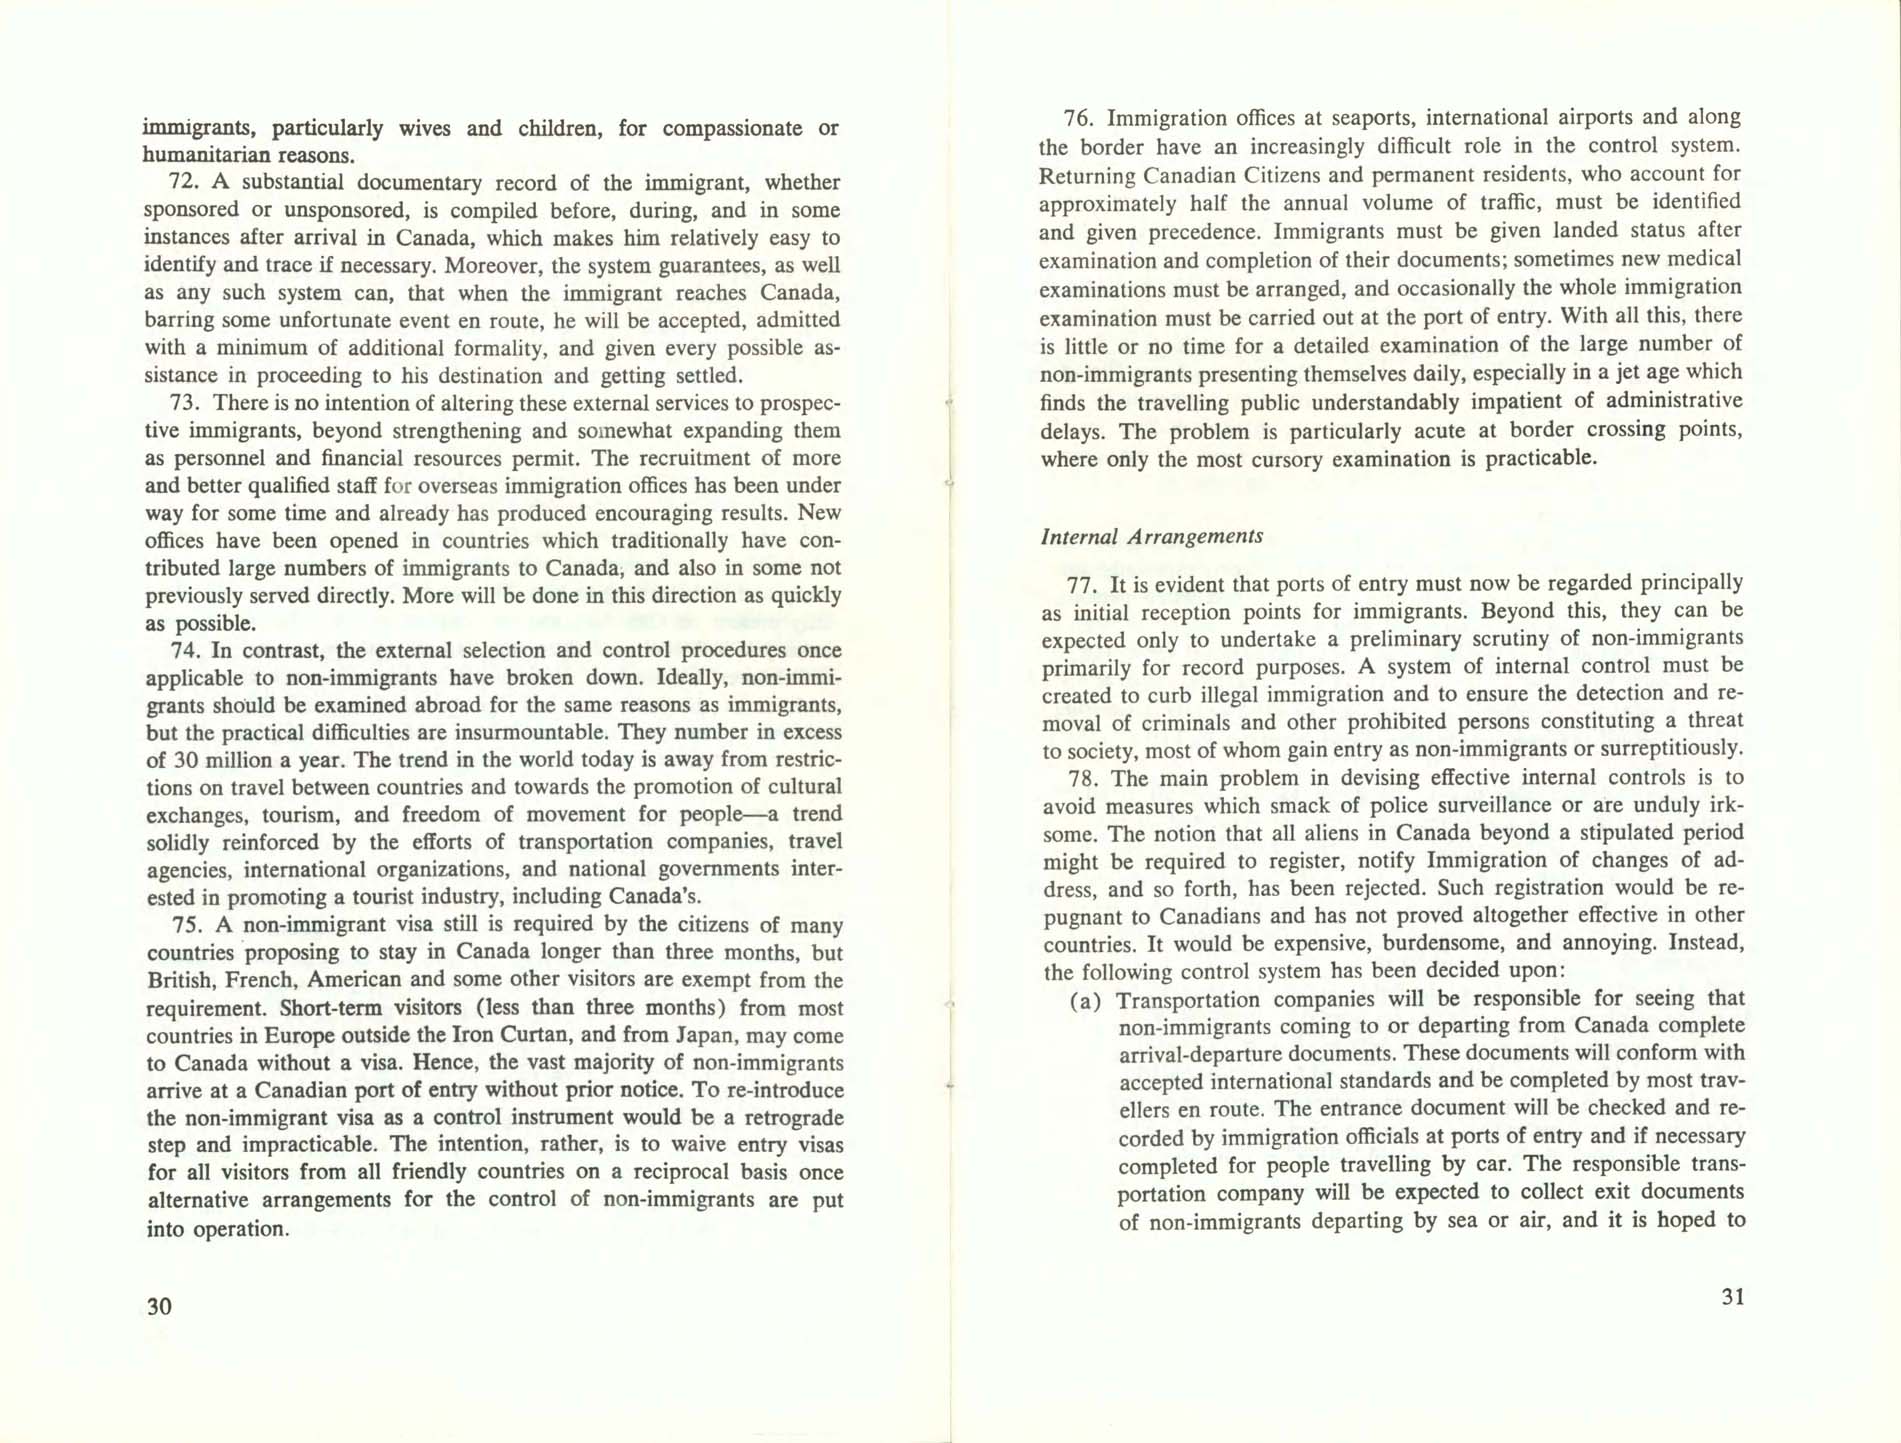 Page 30, 31 White Paper on Immigration, 1966